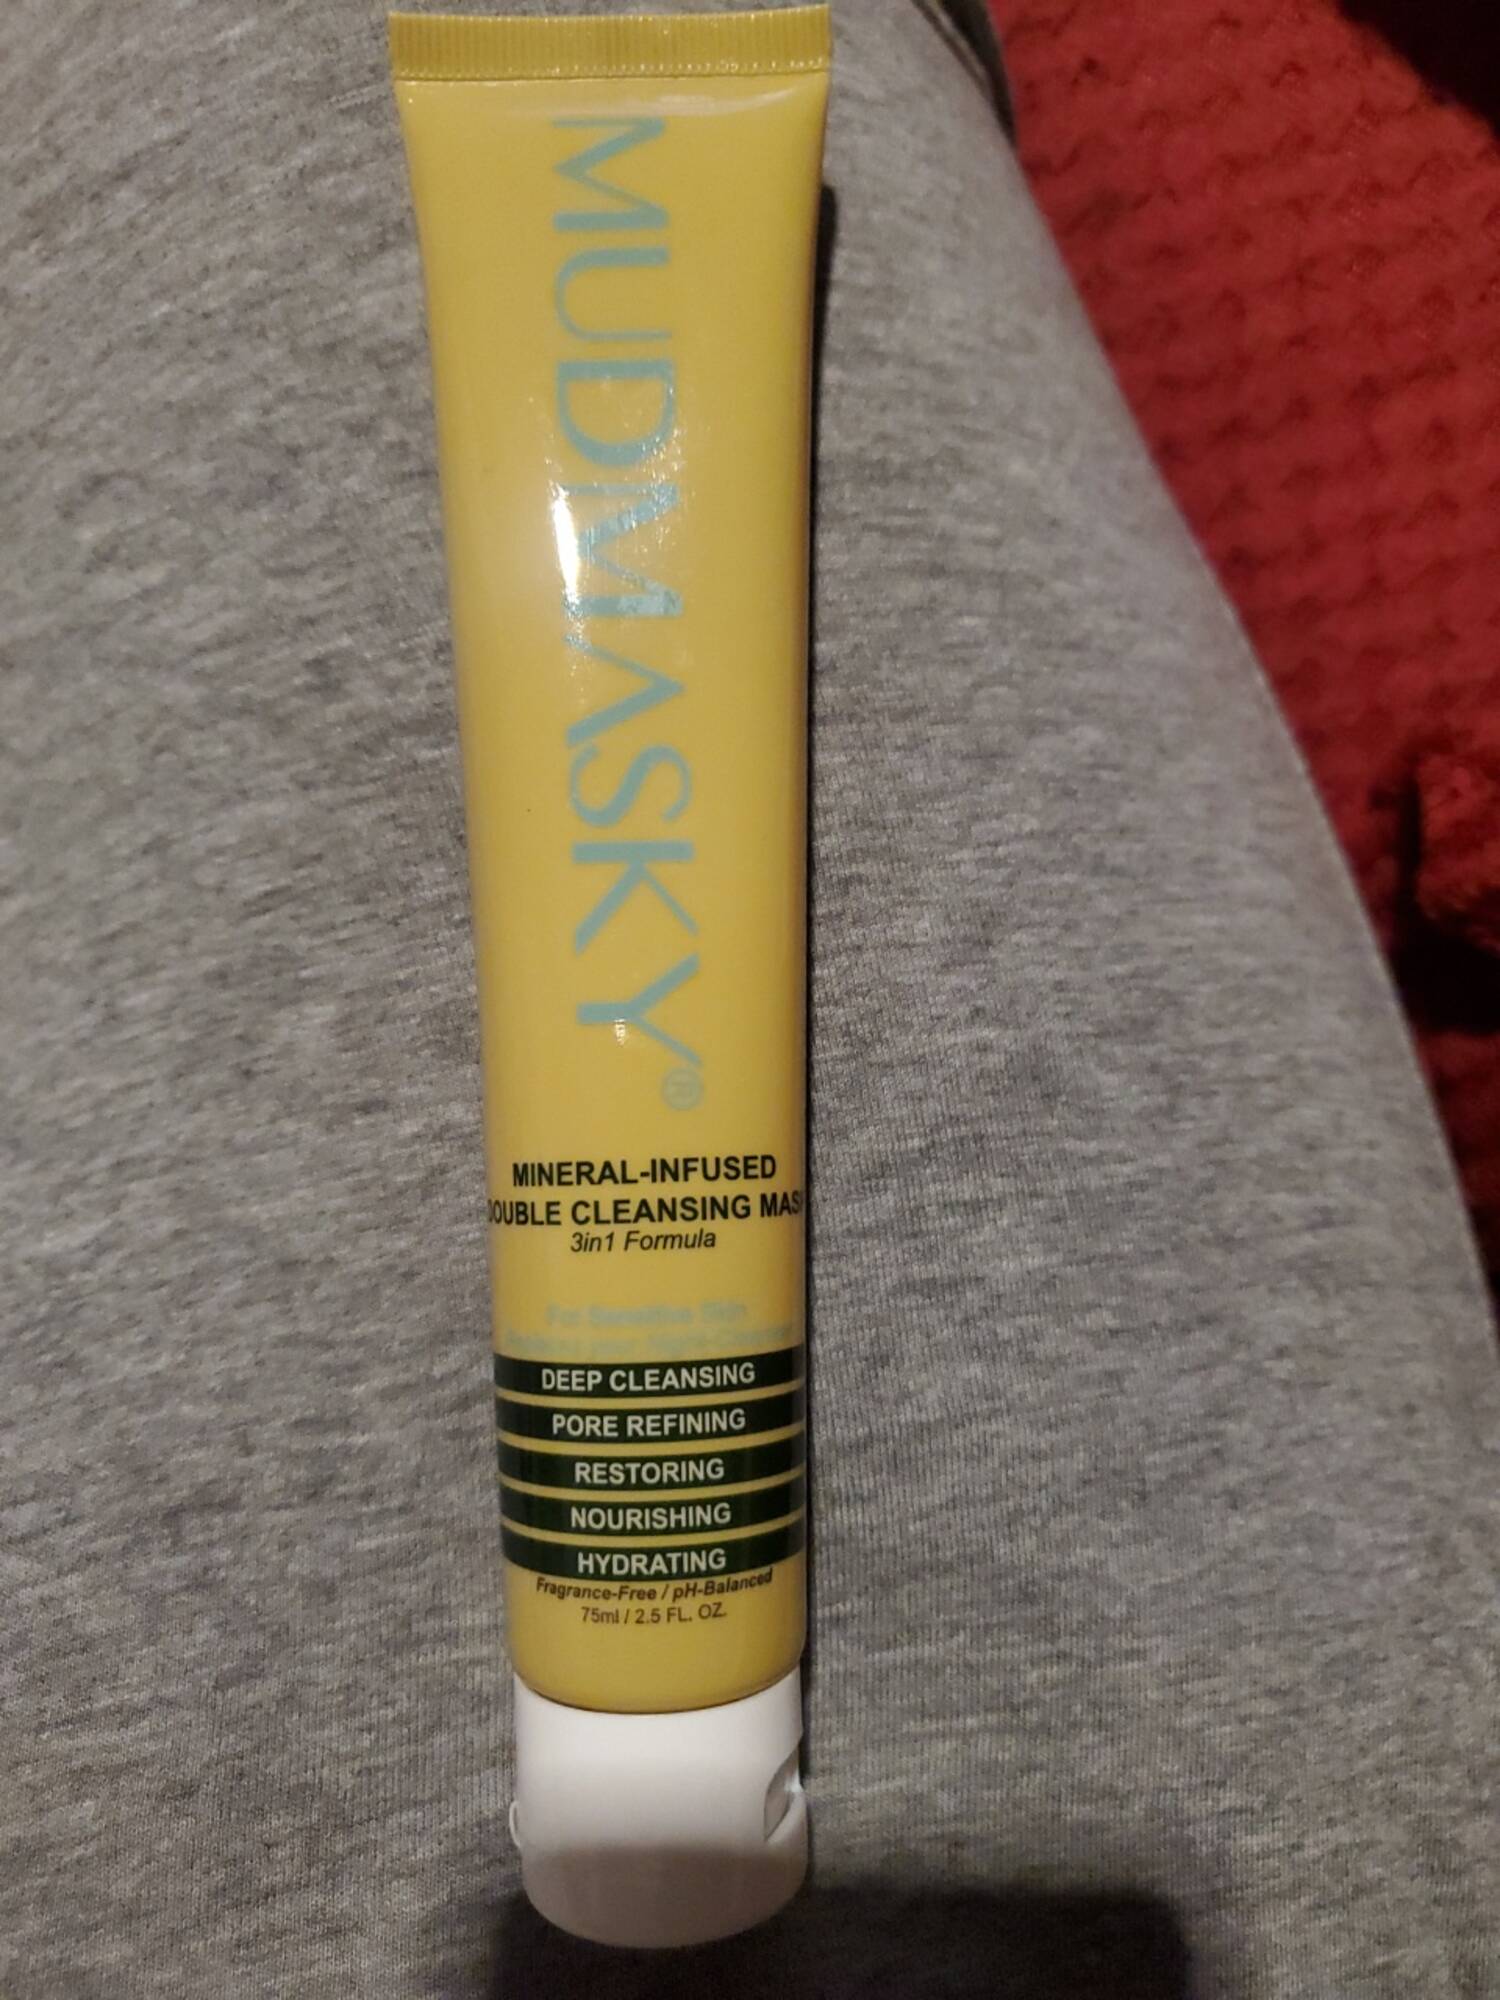 MUDMASKY - Mineral-infused double cleansing mask